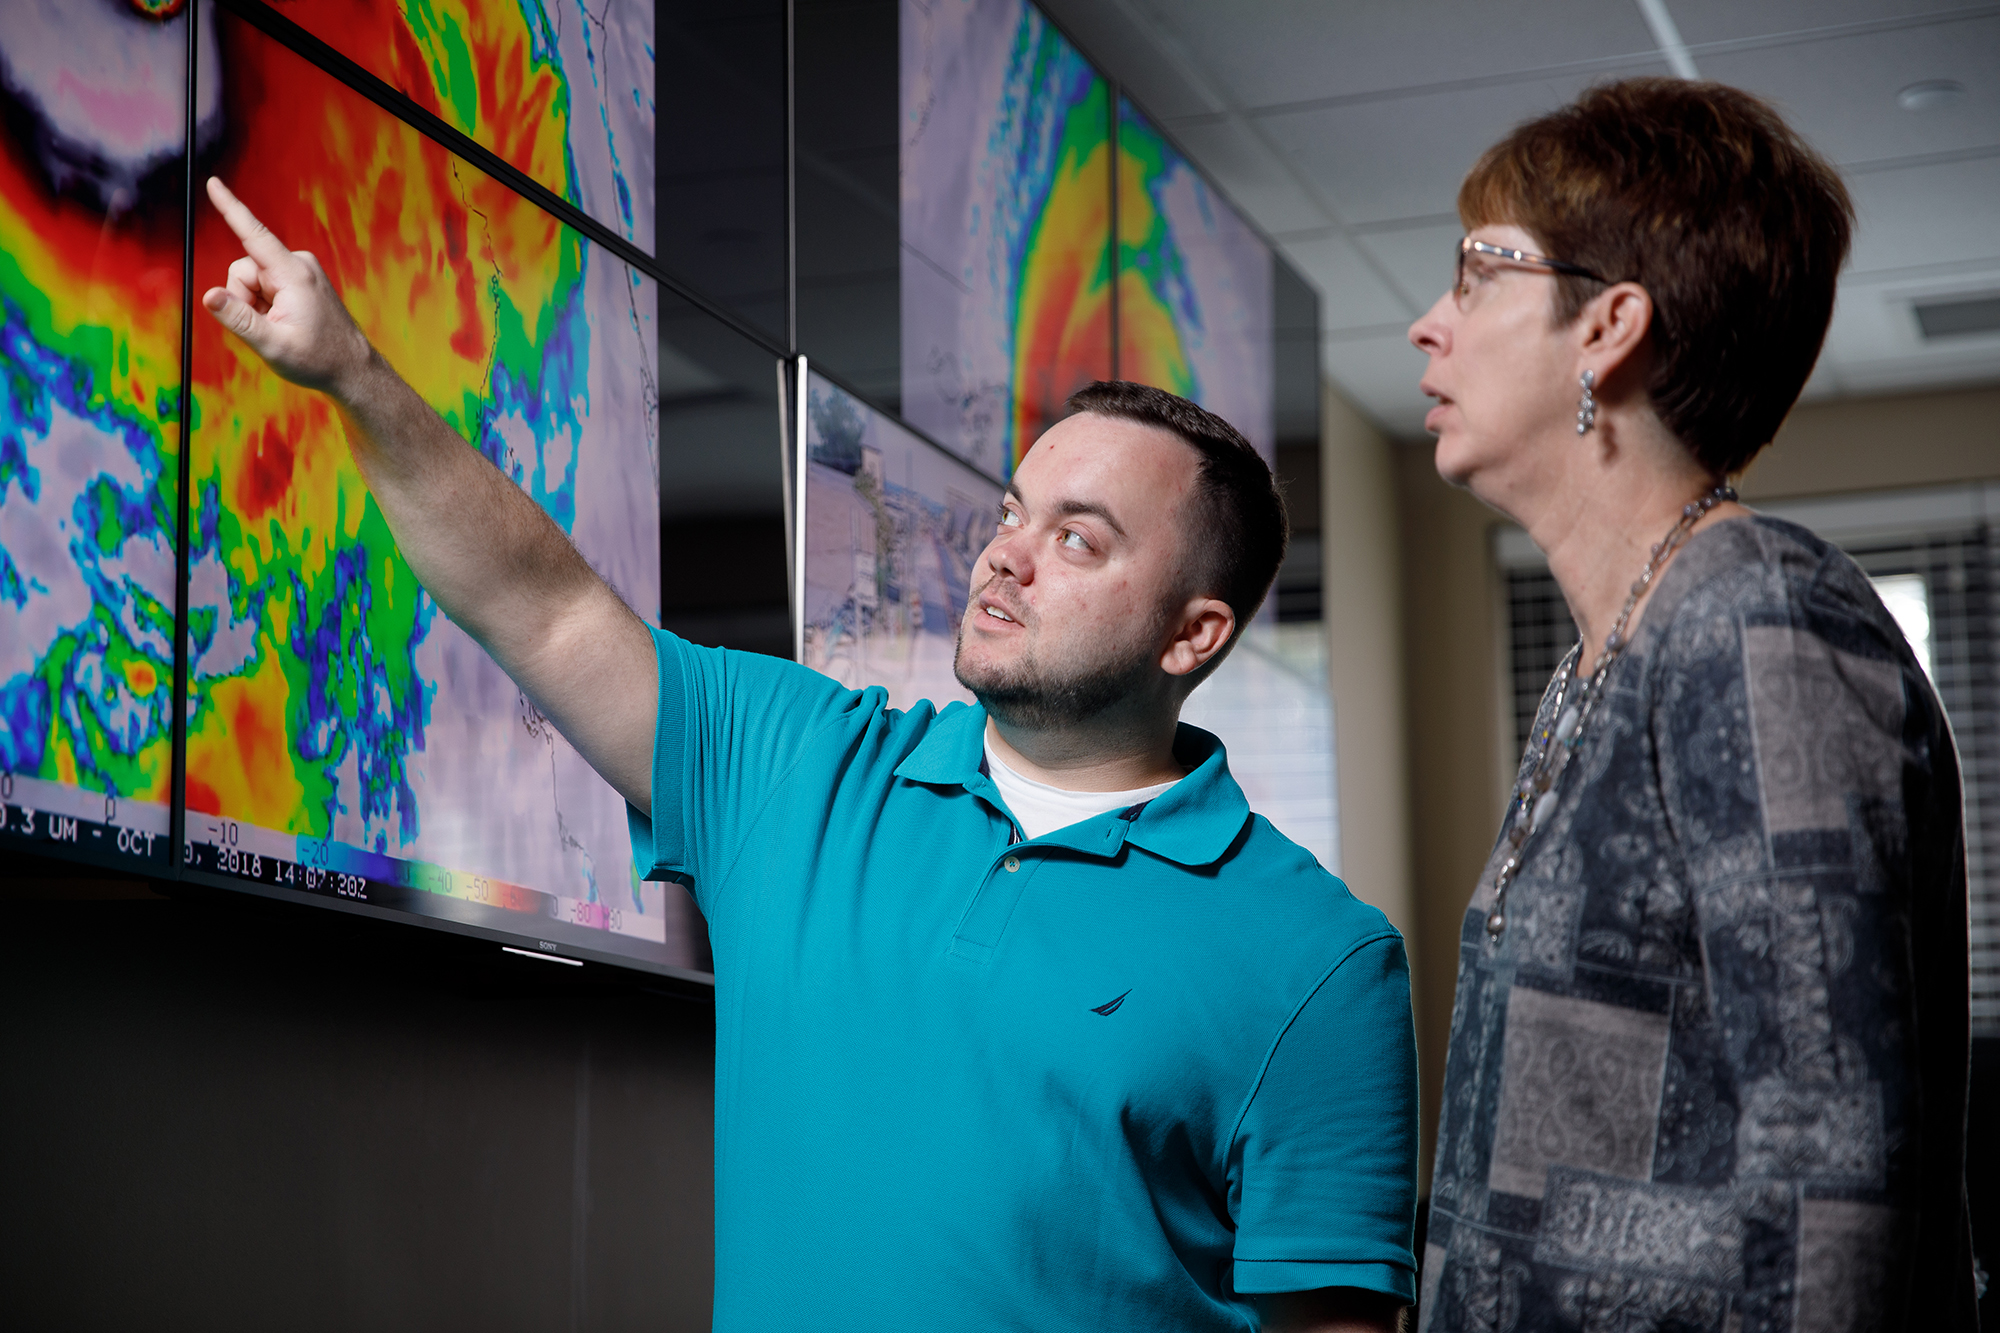 A meteorlogist points to a large screen displaying weather radar information while another scientist looks on.